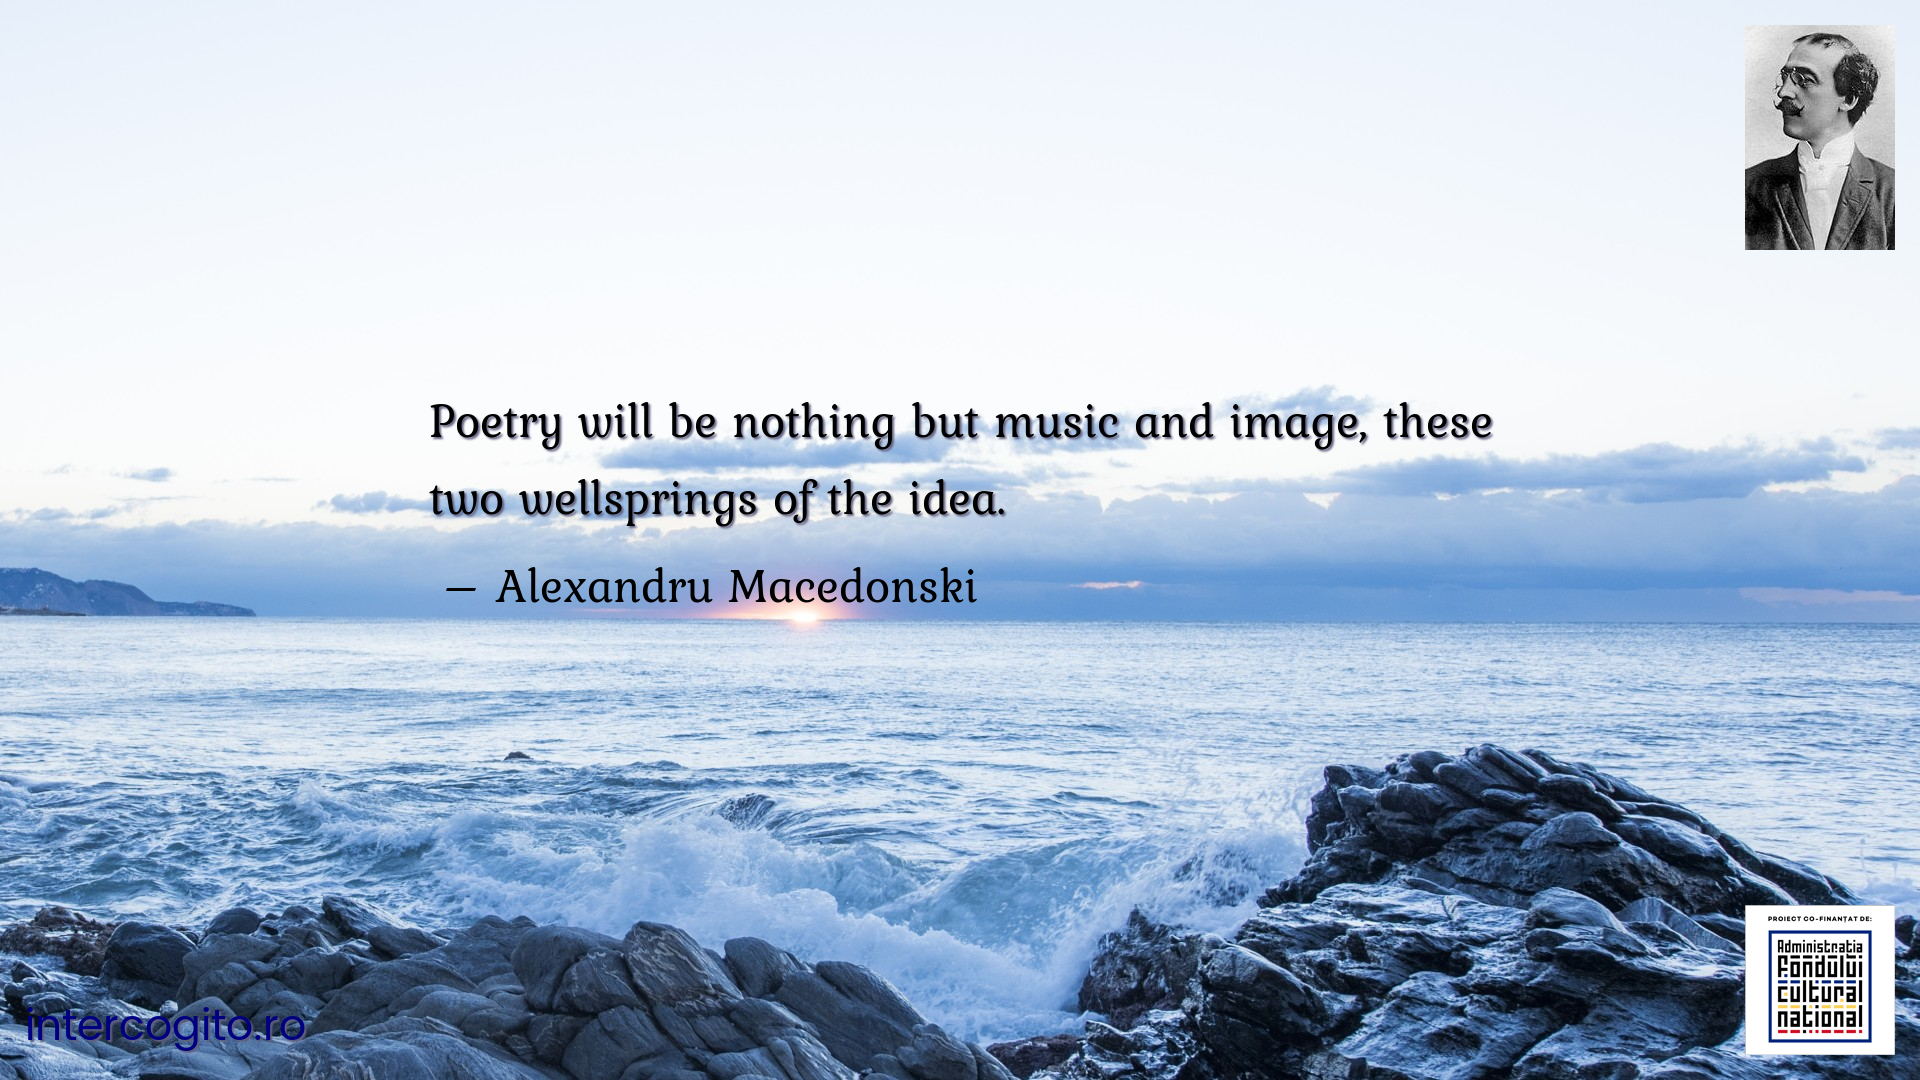 Poetry will be nothing but music and image, these two wellsprings of the idea.